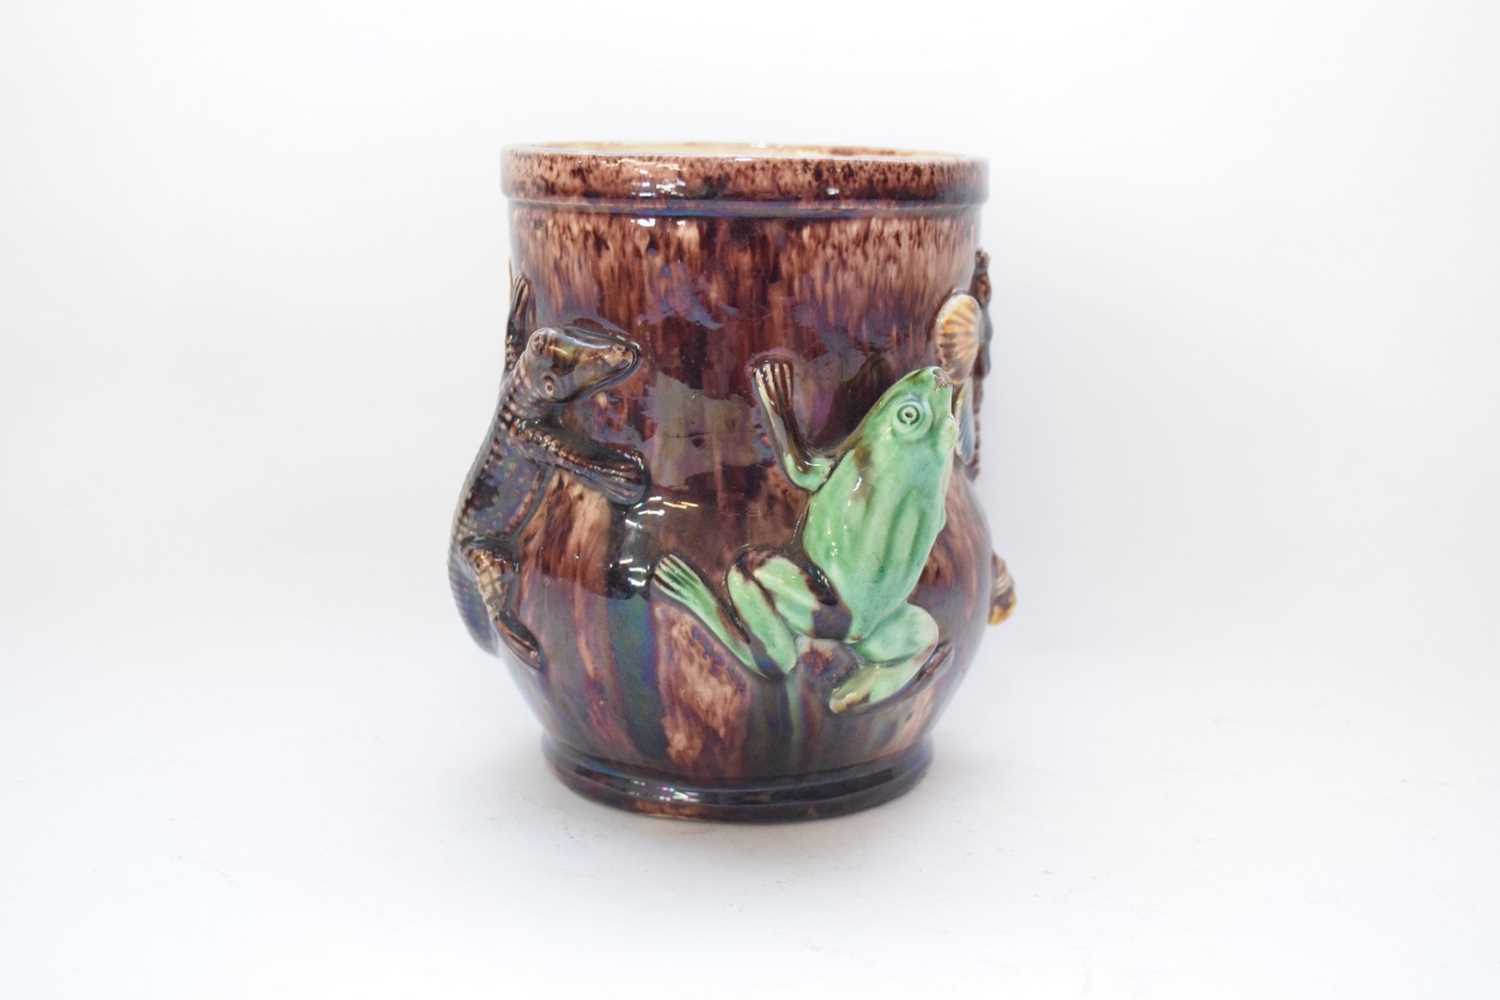 Continental majolica style vase modelled in relief with a green frog, insects and a snake in - Image 5 of 6